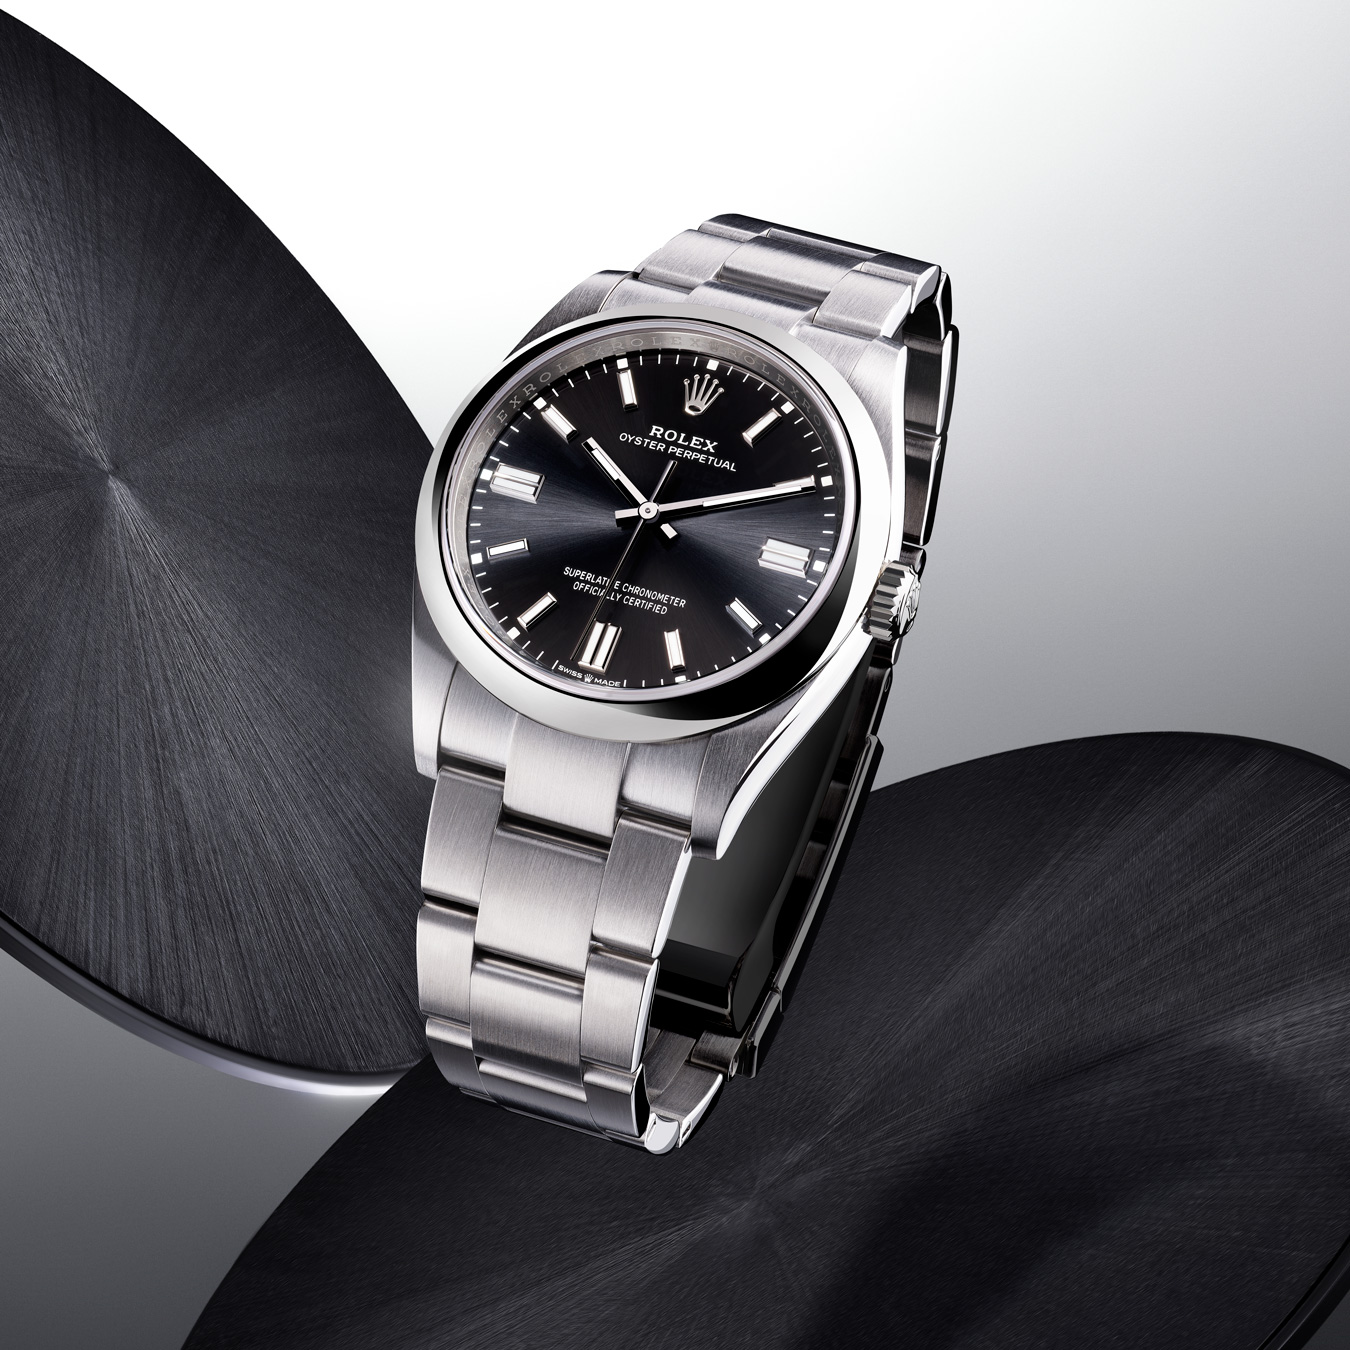 Silver Rolex Oyster Perpetual with link strap and black dial